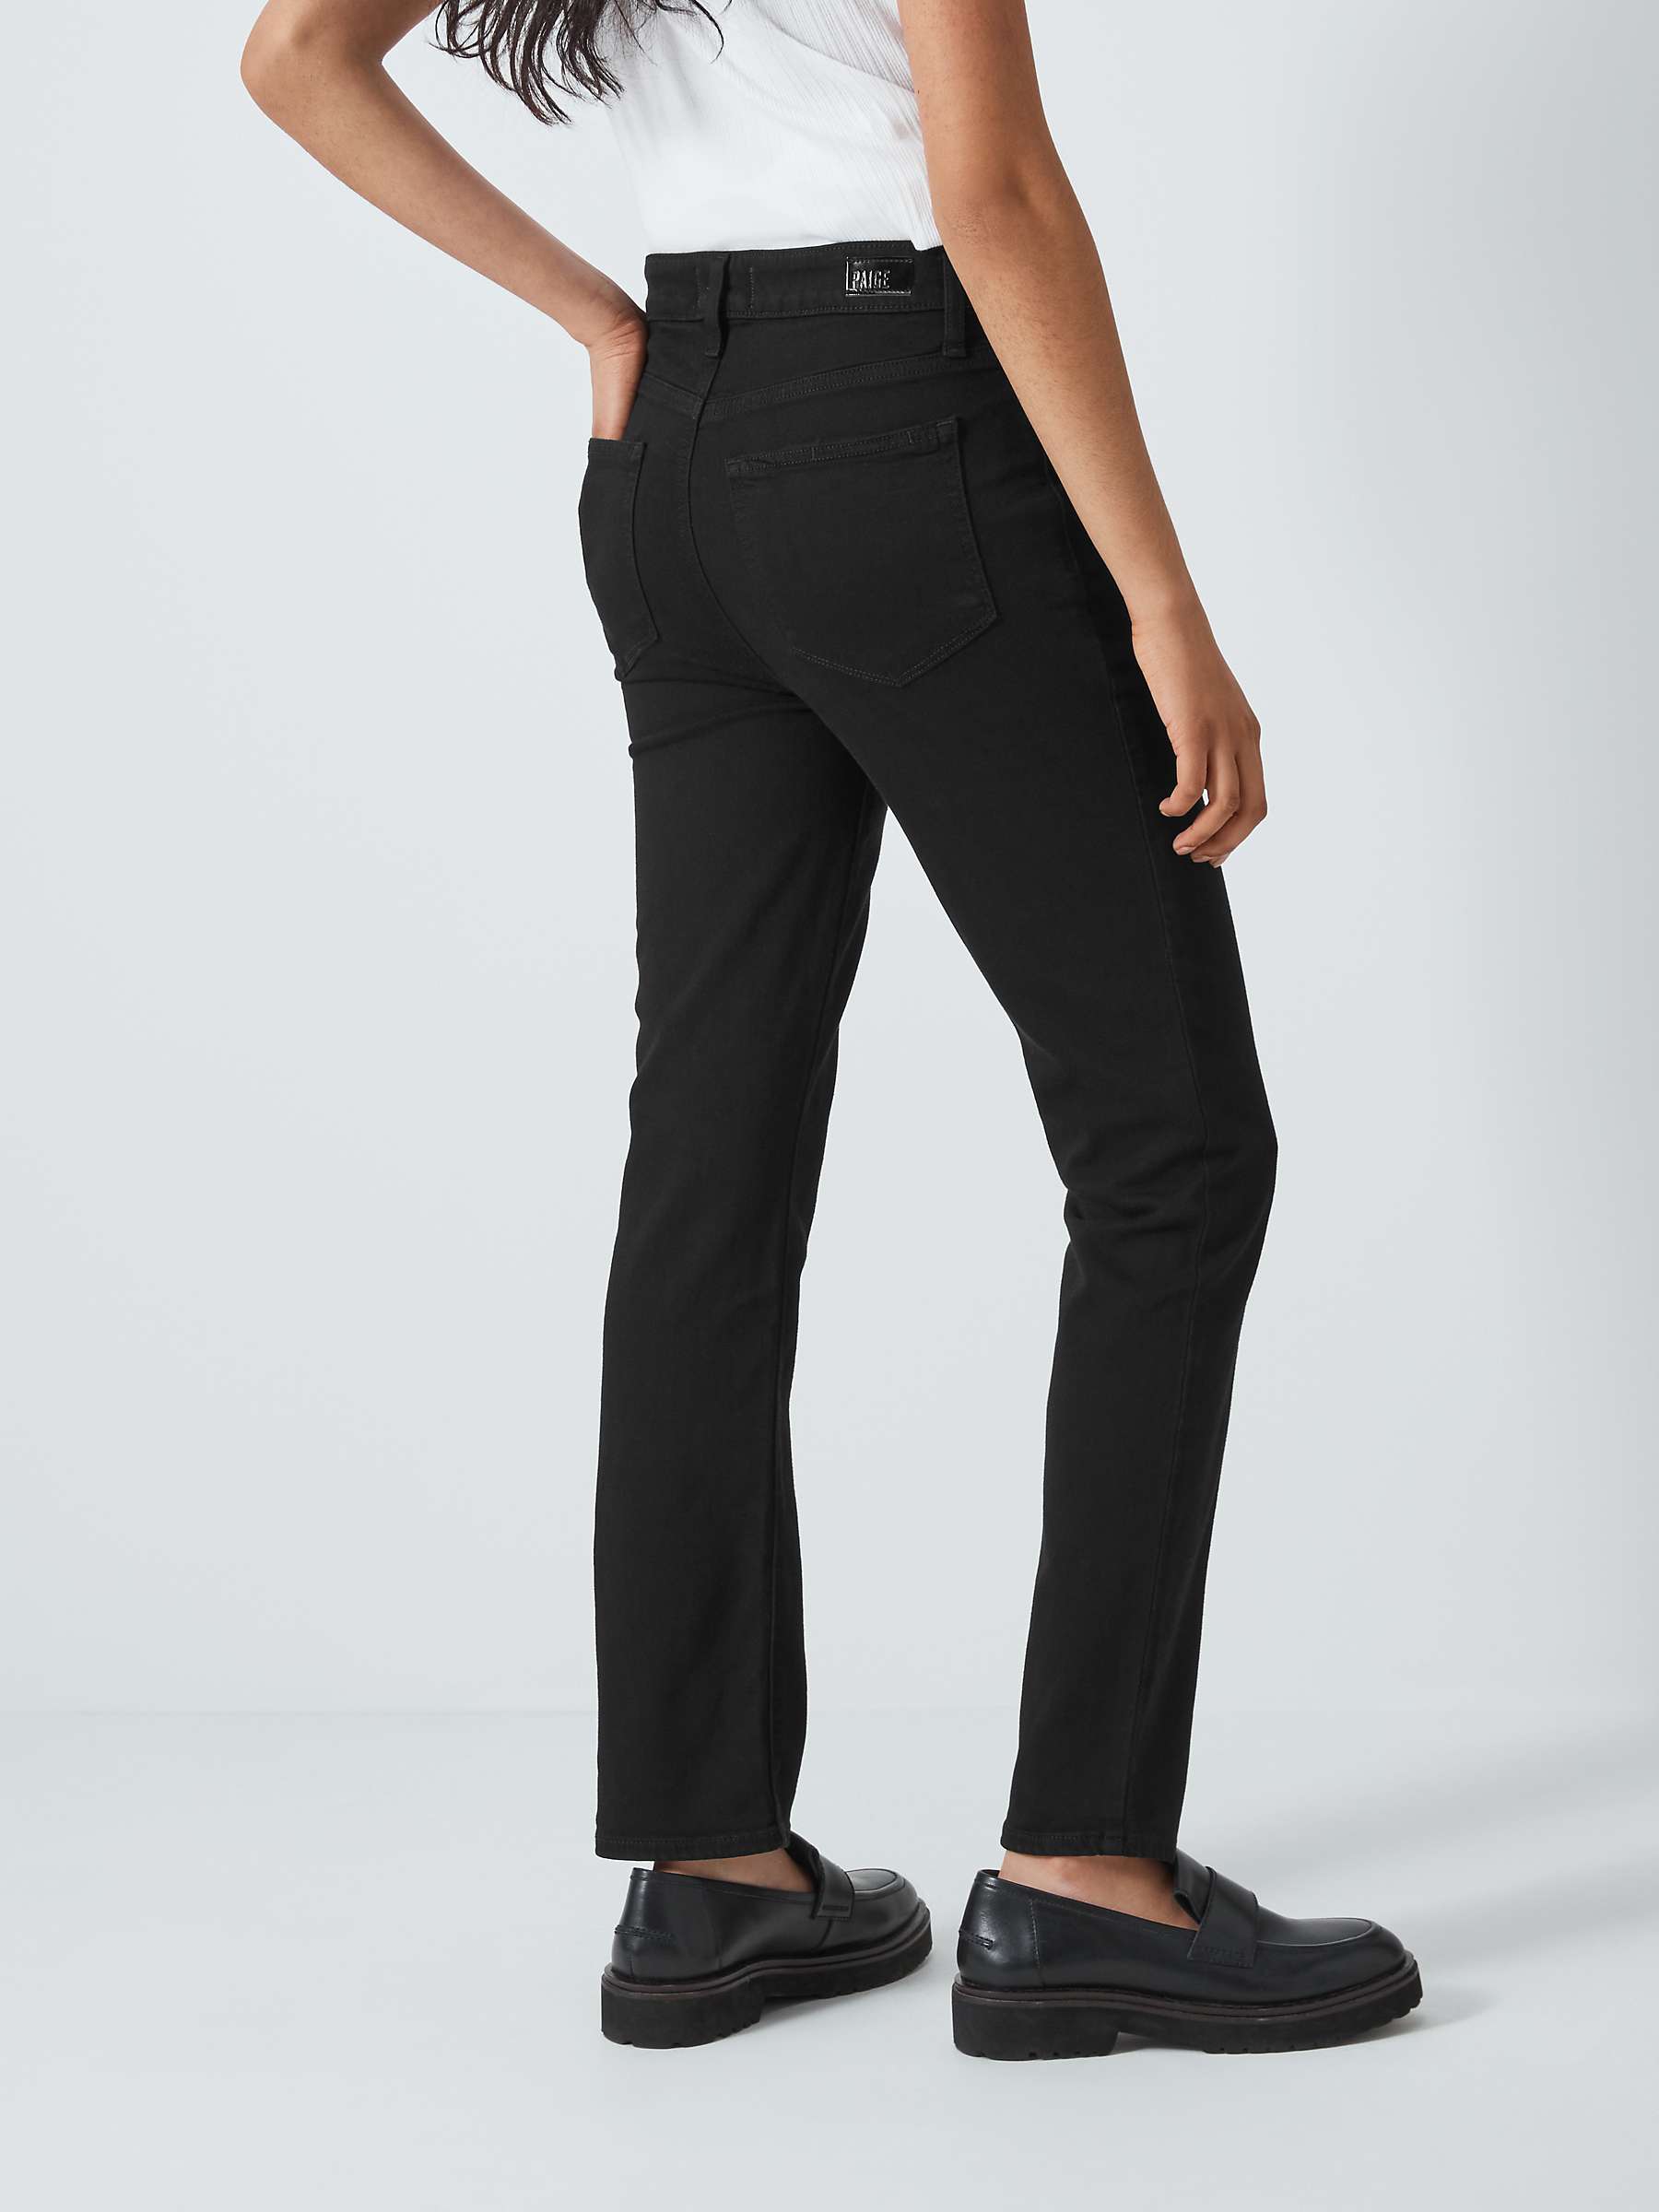 Buy PAIGE Cindy High Rise Straight Leg Jeans, Black Online at johnlewis.com